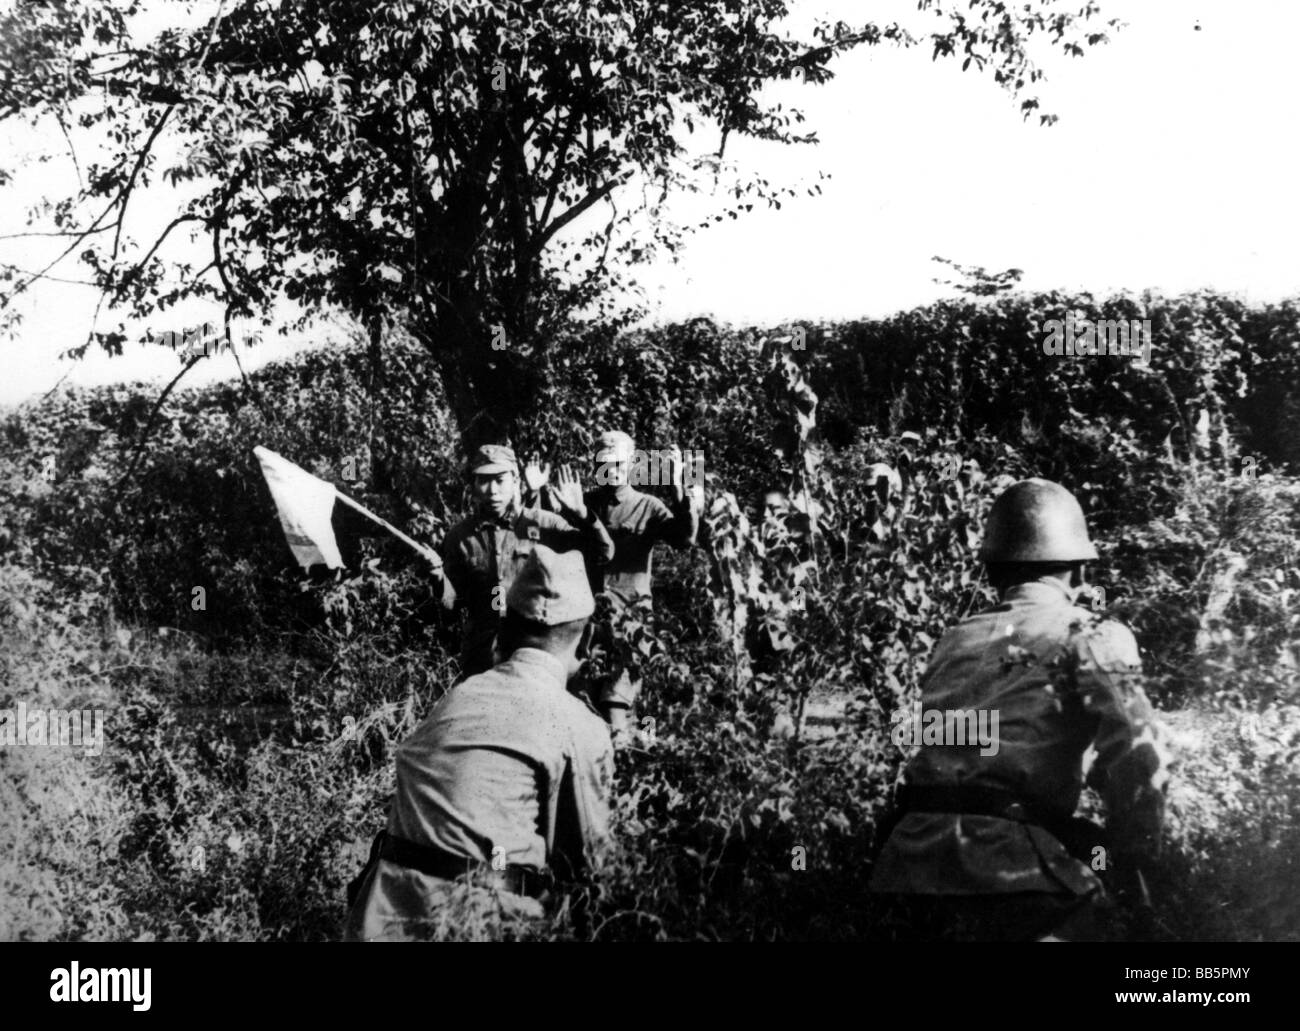 Second Sino-Japanese War, 1937 - 1945, surrender of Chinese soldiers, 3.10.1938, Japan, Asia, historic, historical, 20th century, 1900s, military, prisoners of war, white flag, people, 1930s, Stock Photo